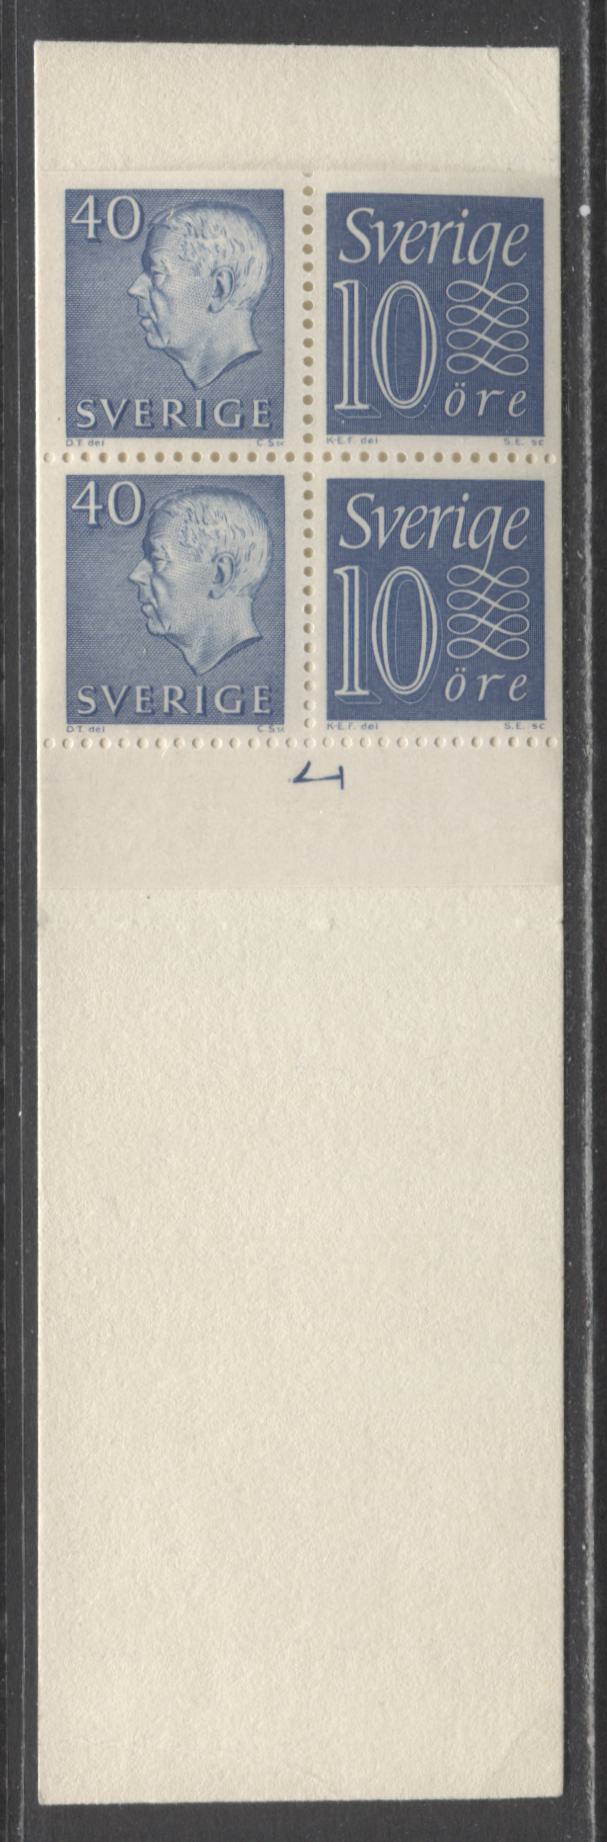 Lot 190 Sweden SC#669b (Facit #HA12OH) 10 Ore & 40 Ore Ultramarine 1964 Re-Engraved King Gustav VI Adolf Definitive Issue, Inverted Pane, 10 Ore Stamps At Right, Horizontal Cylinder 1 Marking, 2 VFNH Booklets of 4 (2 +2),  Estimated Value $12